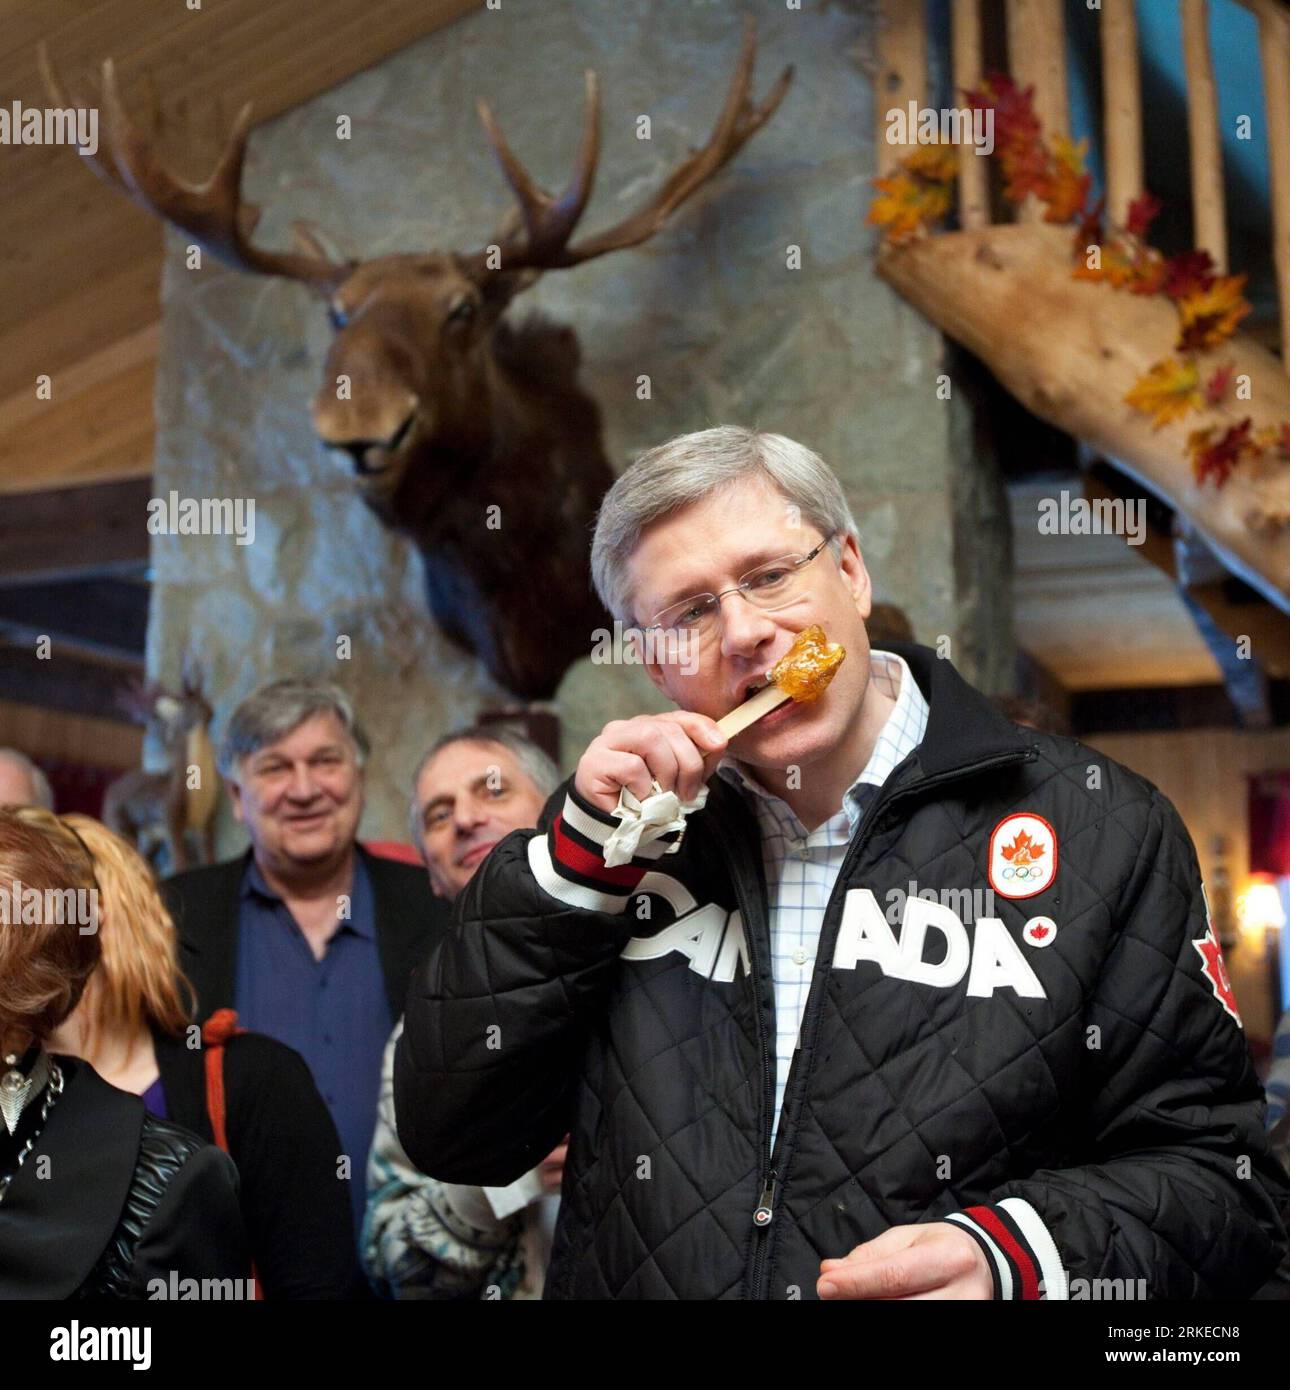 (110405) -- OTTAWA, April 5, 2011 (Xinhua) -- Canada s Prime Minister and Conservative Party leader Stephen Harper (R) tastes sweets at a sugar shack in Saint-Norbert-D arthabaska, Quebec, Canada, on April 5, 2011. Harper, who is on a campaign trip for a federal election on May 2, said that a re-elected Conservative government will support rural doctors and nurses and a tax credit for volunteer firefighters. (Xinhua/Canadian Conservative Party) (zw) CANADA-OTTAWA-ELECTION-HARPER PUBLICATIONxNOTxINxCHN Stock Photo